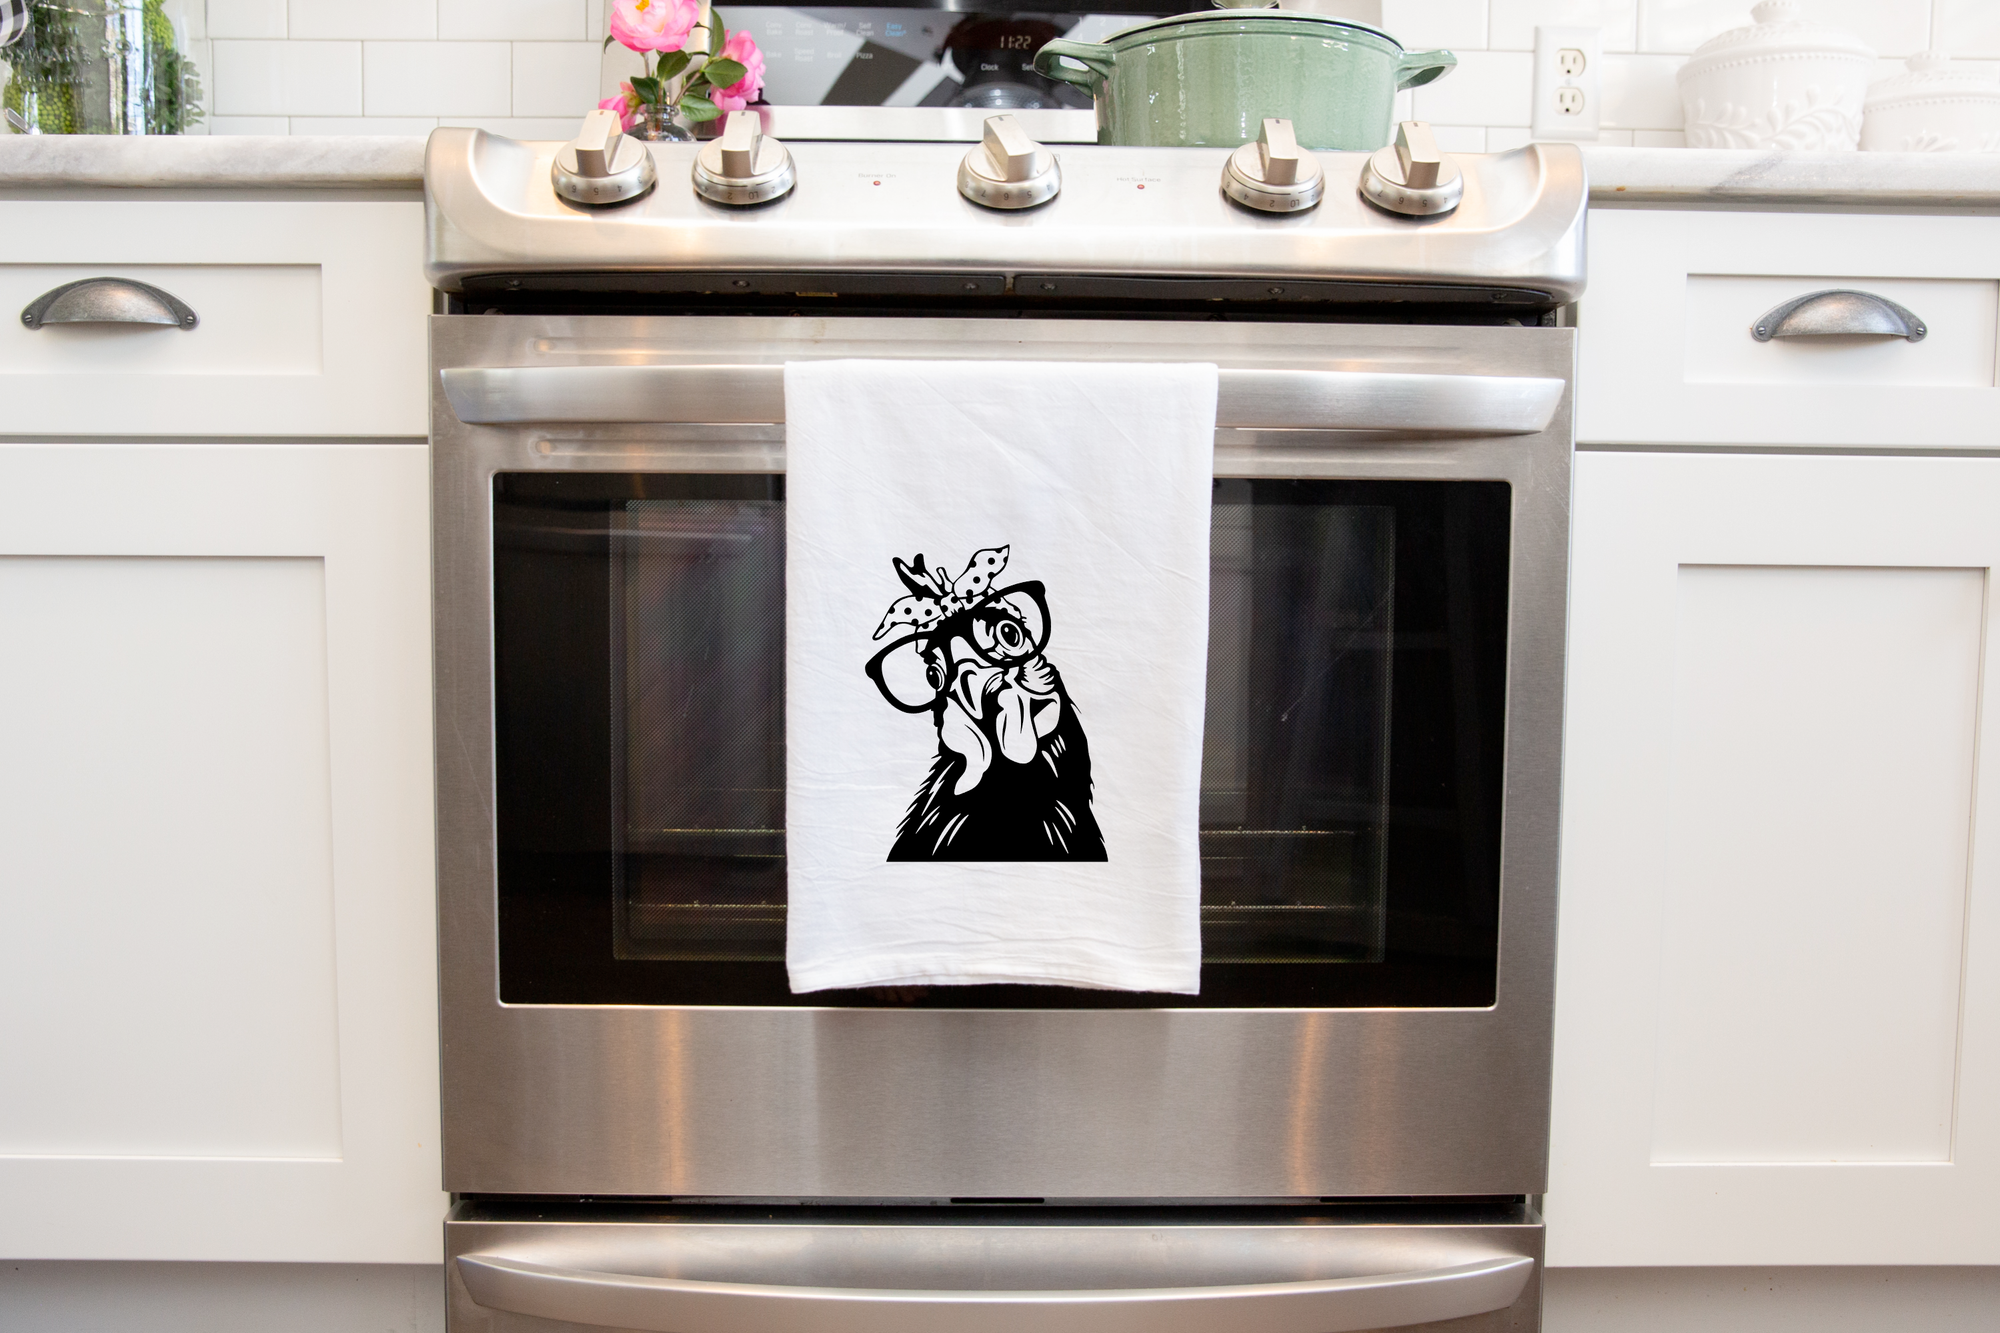 A Funny Chicken Tea Towel made from heat transfer vinyl hangs on the handle of a stainless steel oven.